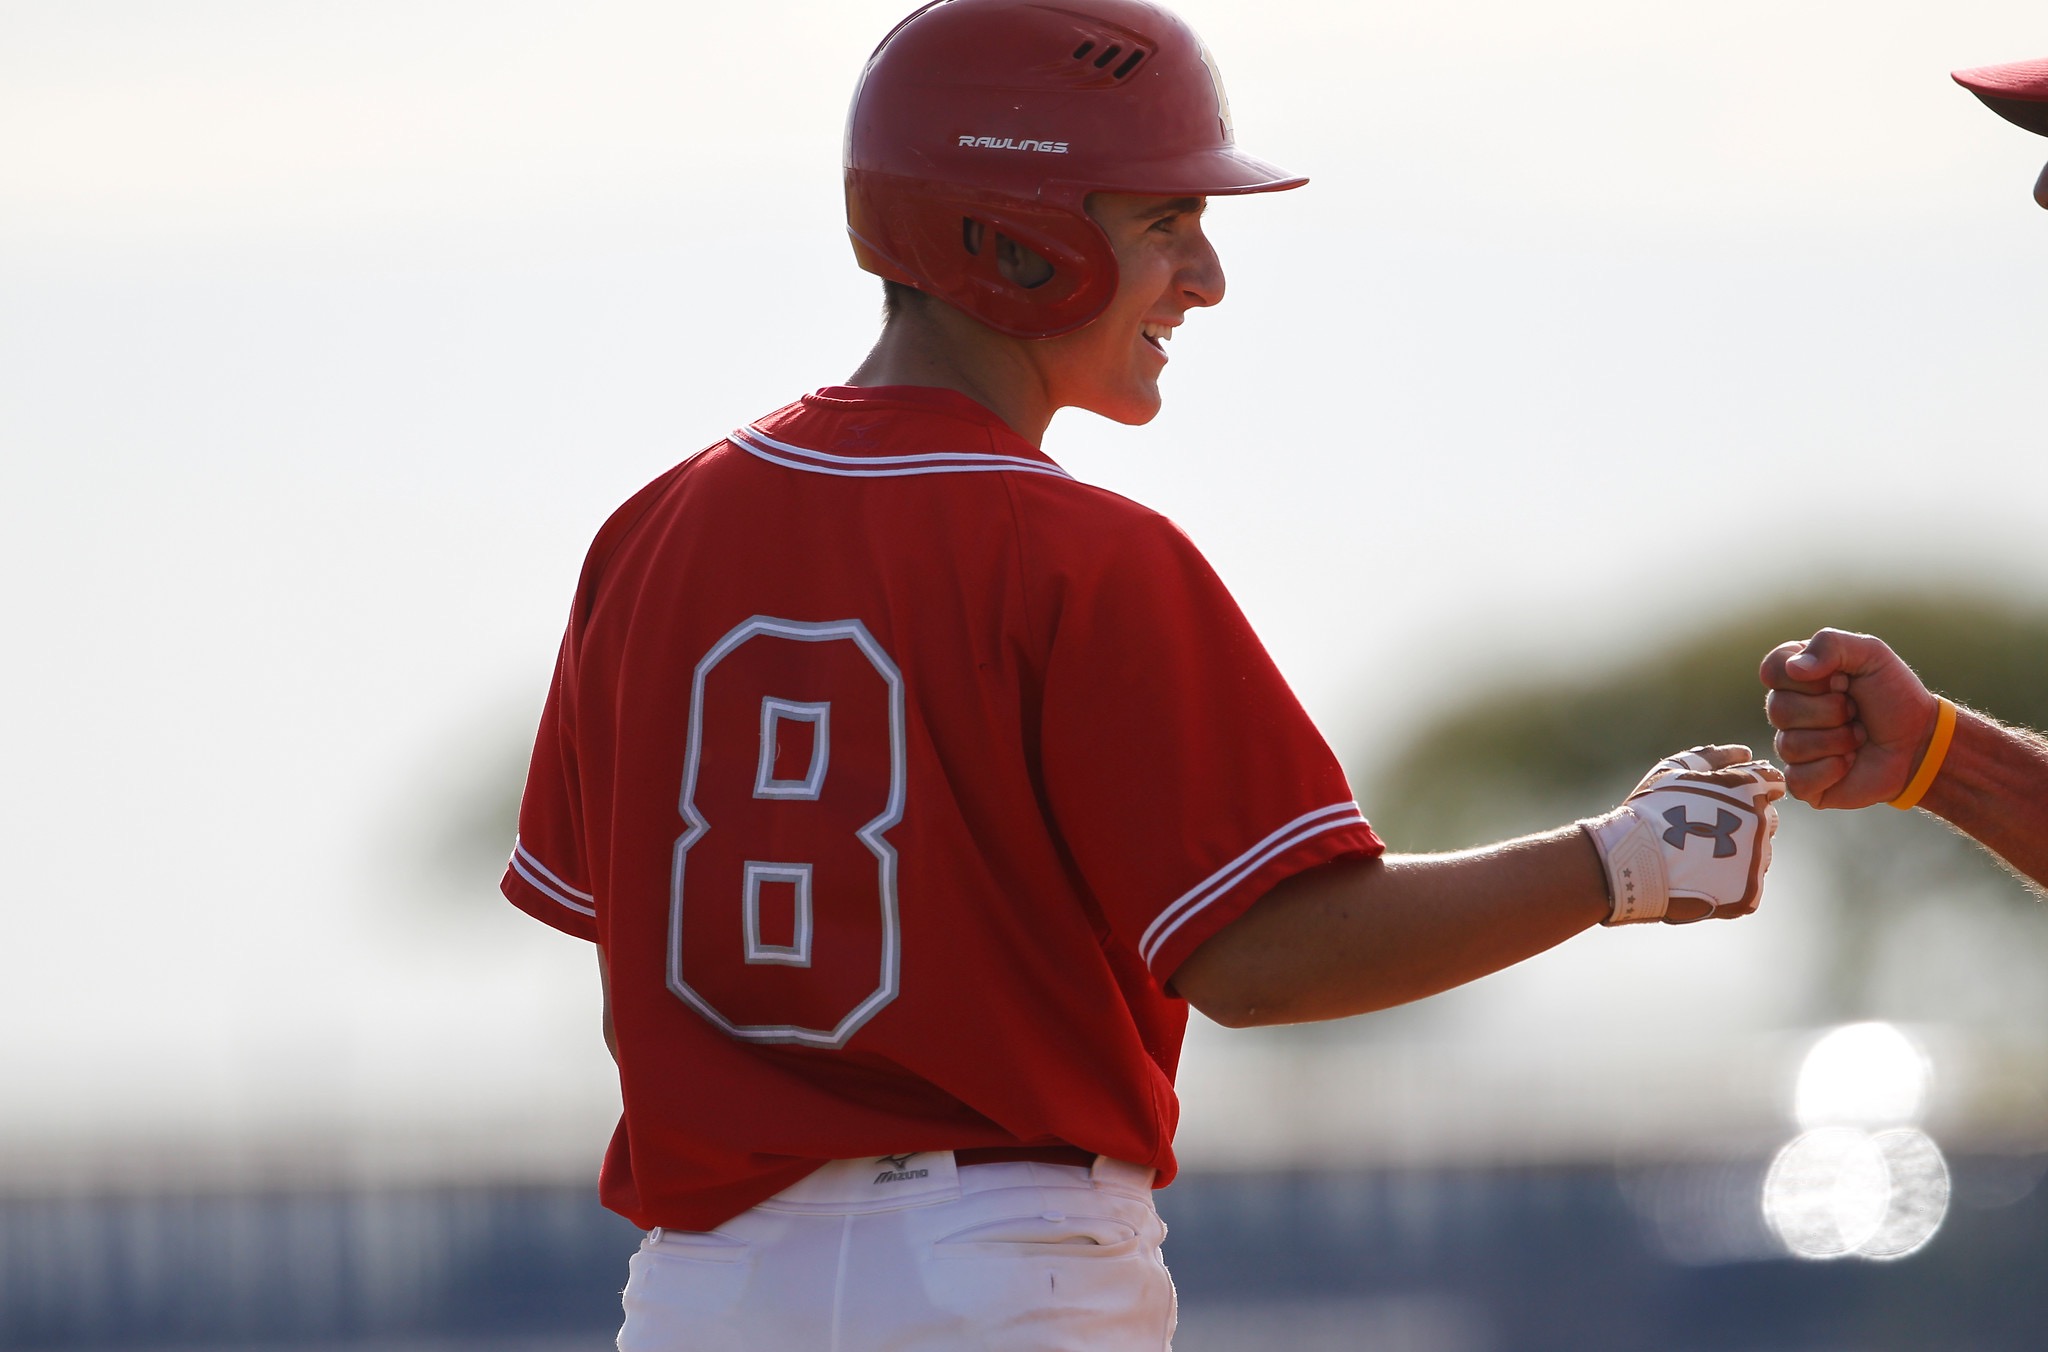 Check out the photos and videos of the baseball recruiting profile Ethan Hott